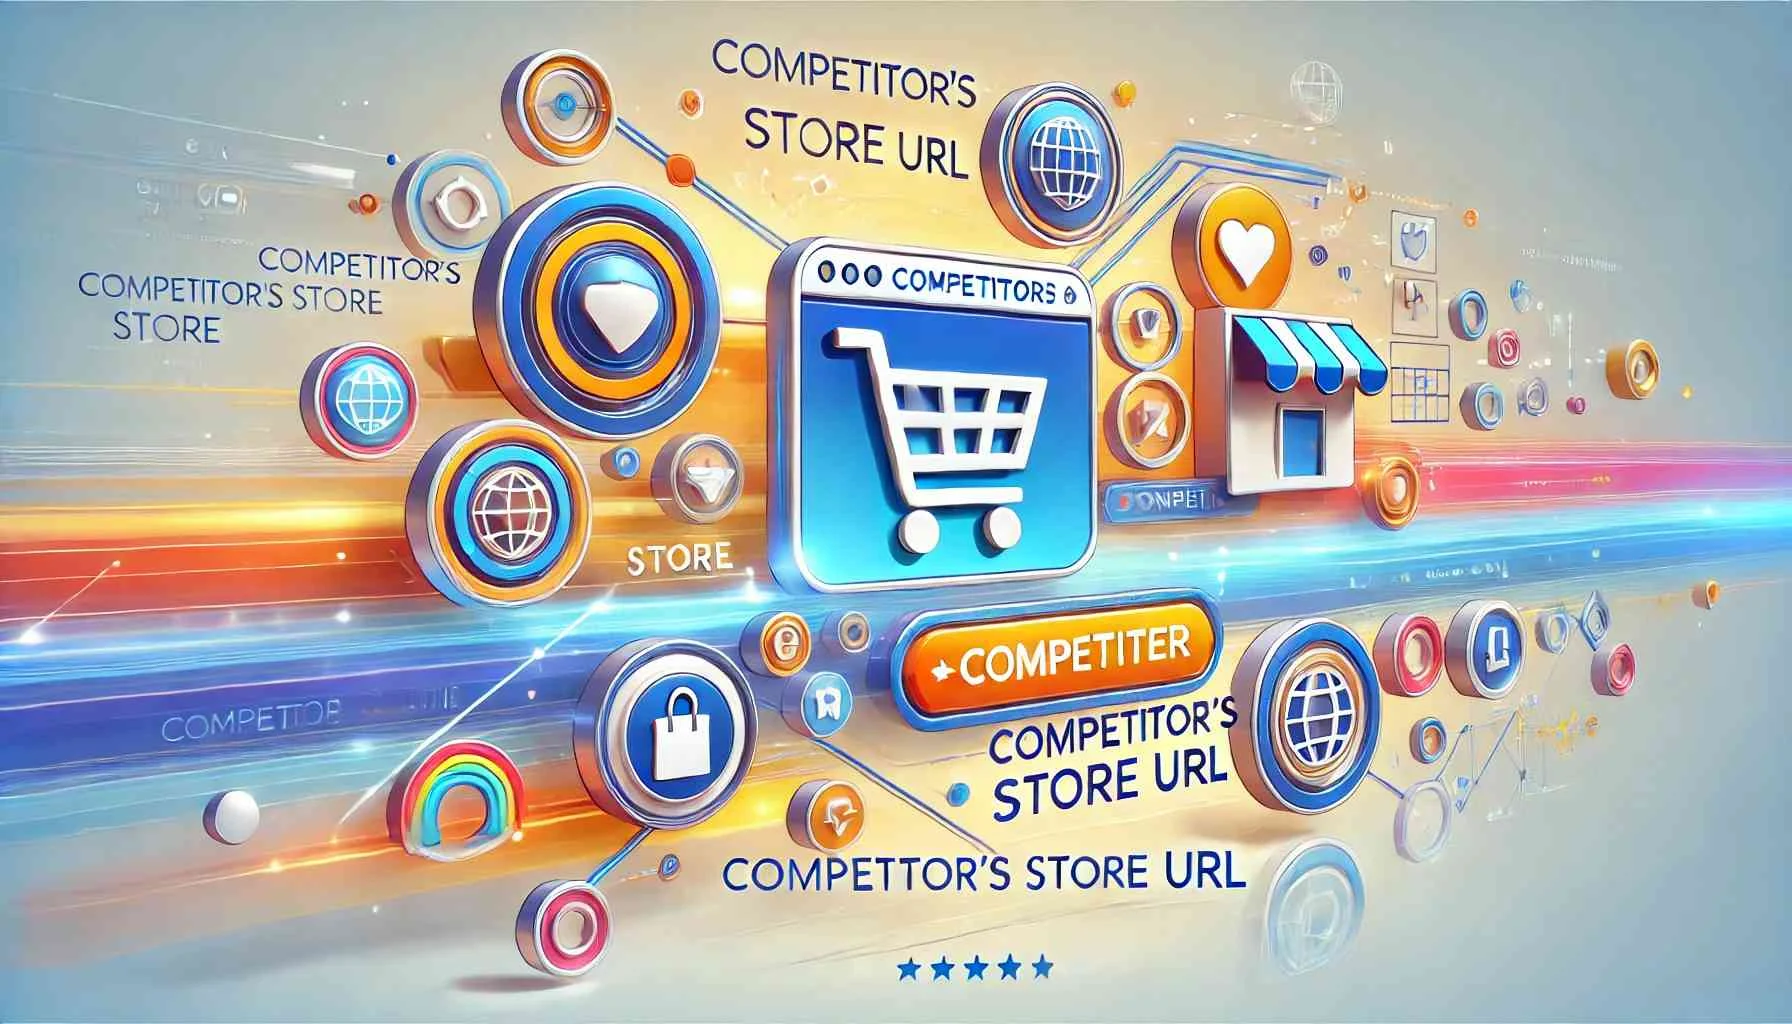 Themed Illustration Depicting The Concept Of Competitors Store Url. The Image Should Use Vibrant And Modern Color 20240714